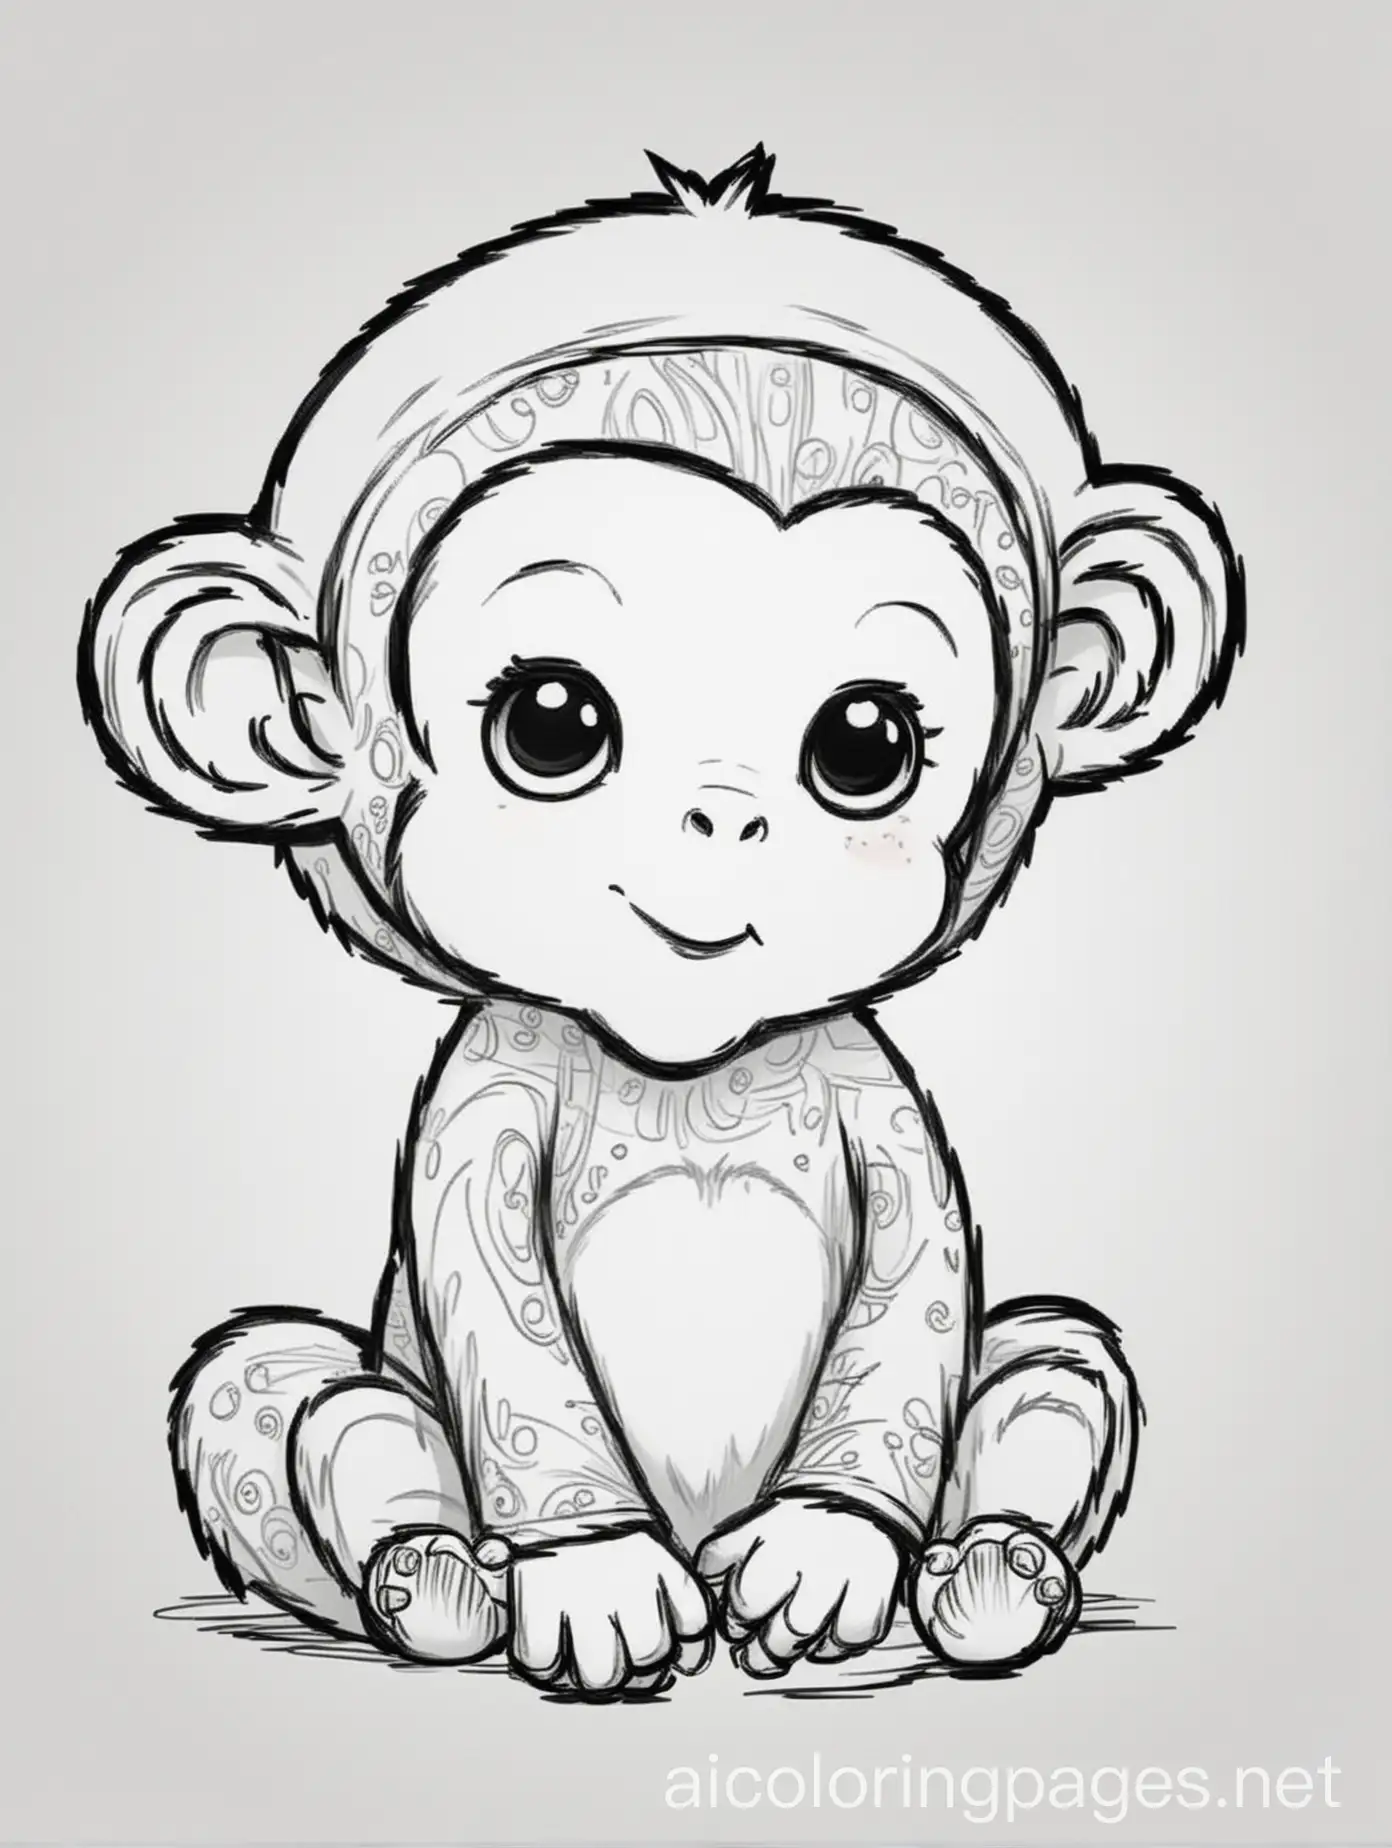 cute moneky, toys around, Coloring Page, black and white, line art, white background, Simplicity, Ample White Space. , Coloring Page, black and white, line art, white background, Simplicity, Ample White Space. The background of the coloring page is plain white to make it easy for young children to color within the lines. The outlines of all the subjects are easy to distinguish, making it simple for kids to color without too much difficulty